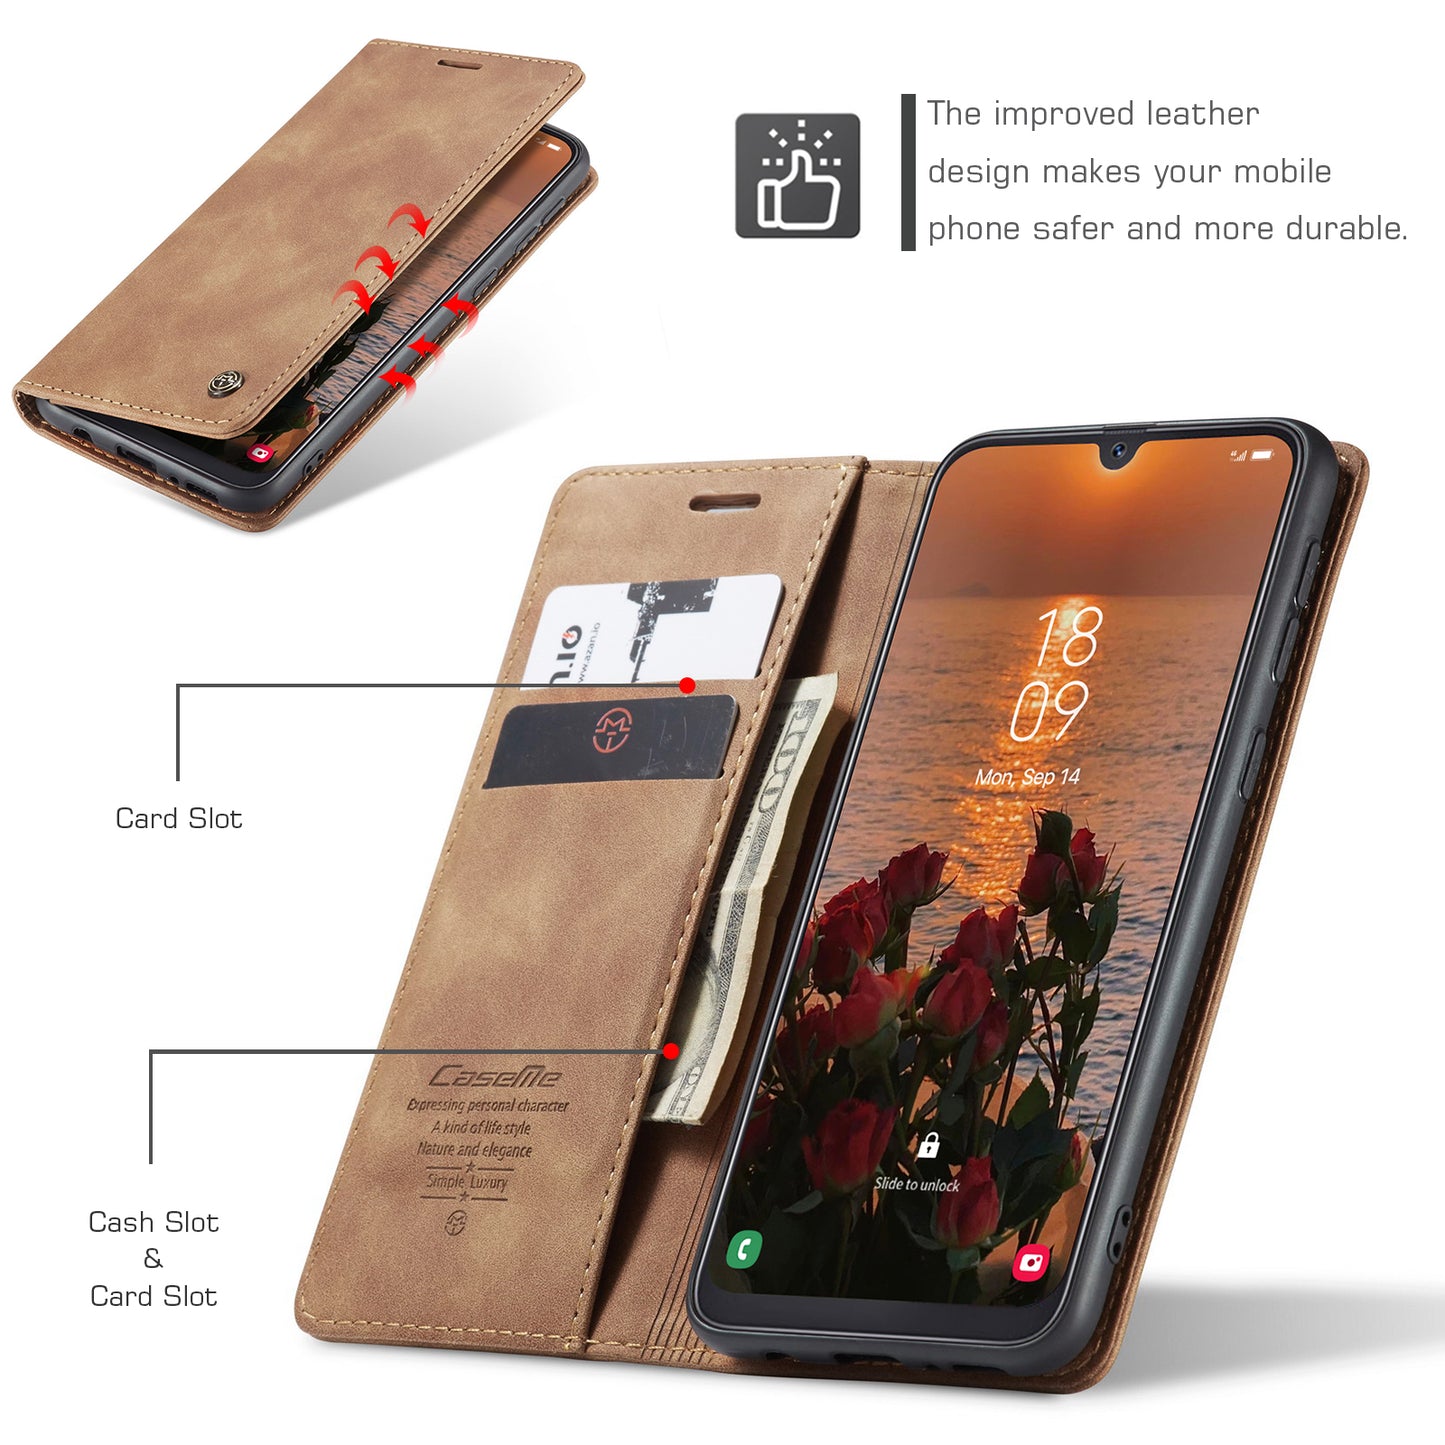 Book Classical Galaxy A40 Leather Case Retro Slim Wallet Stand